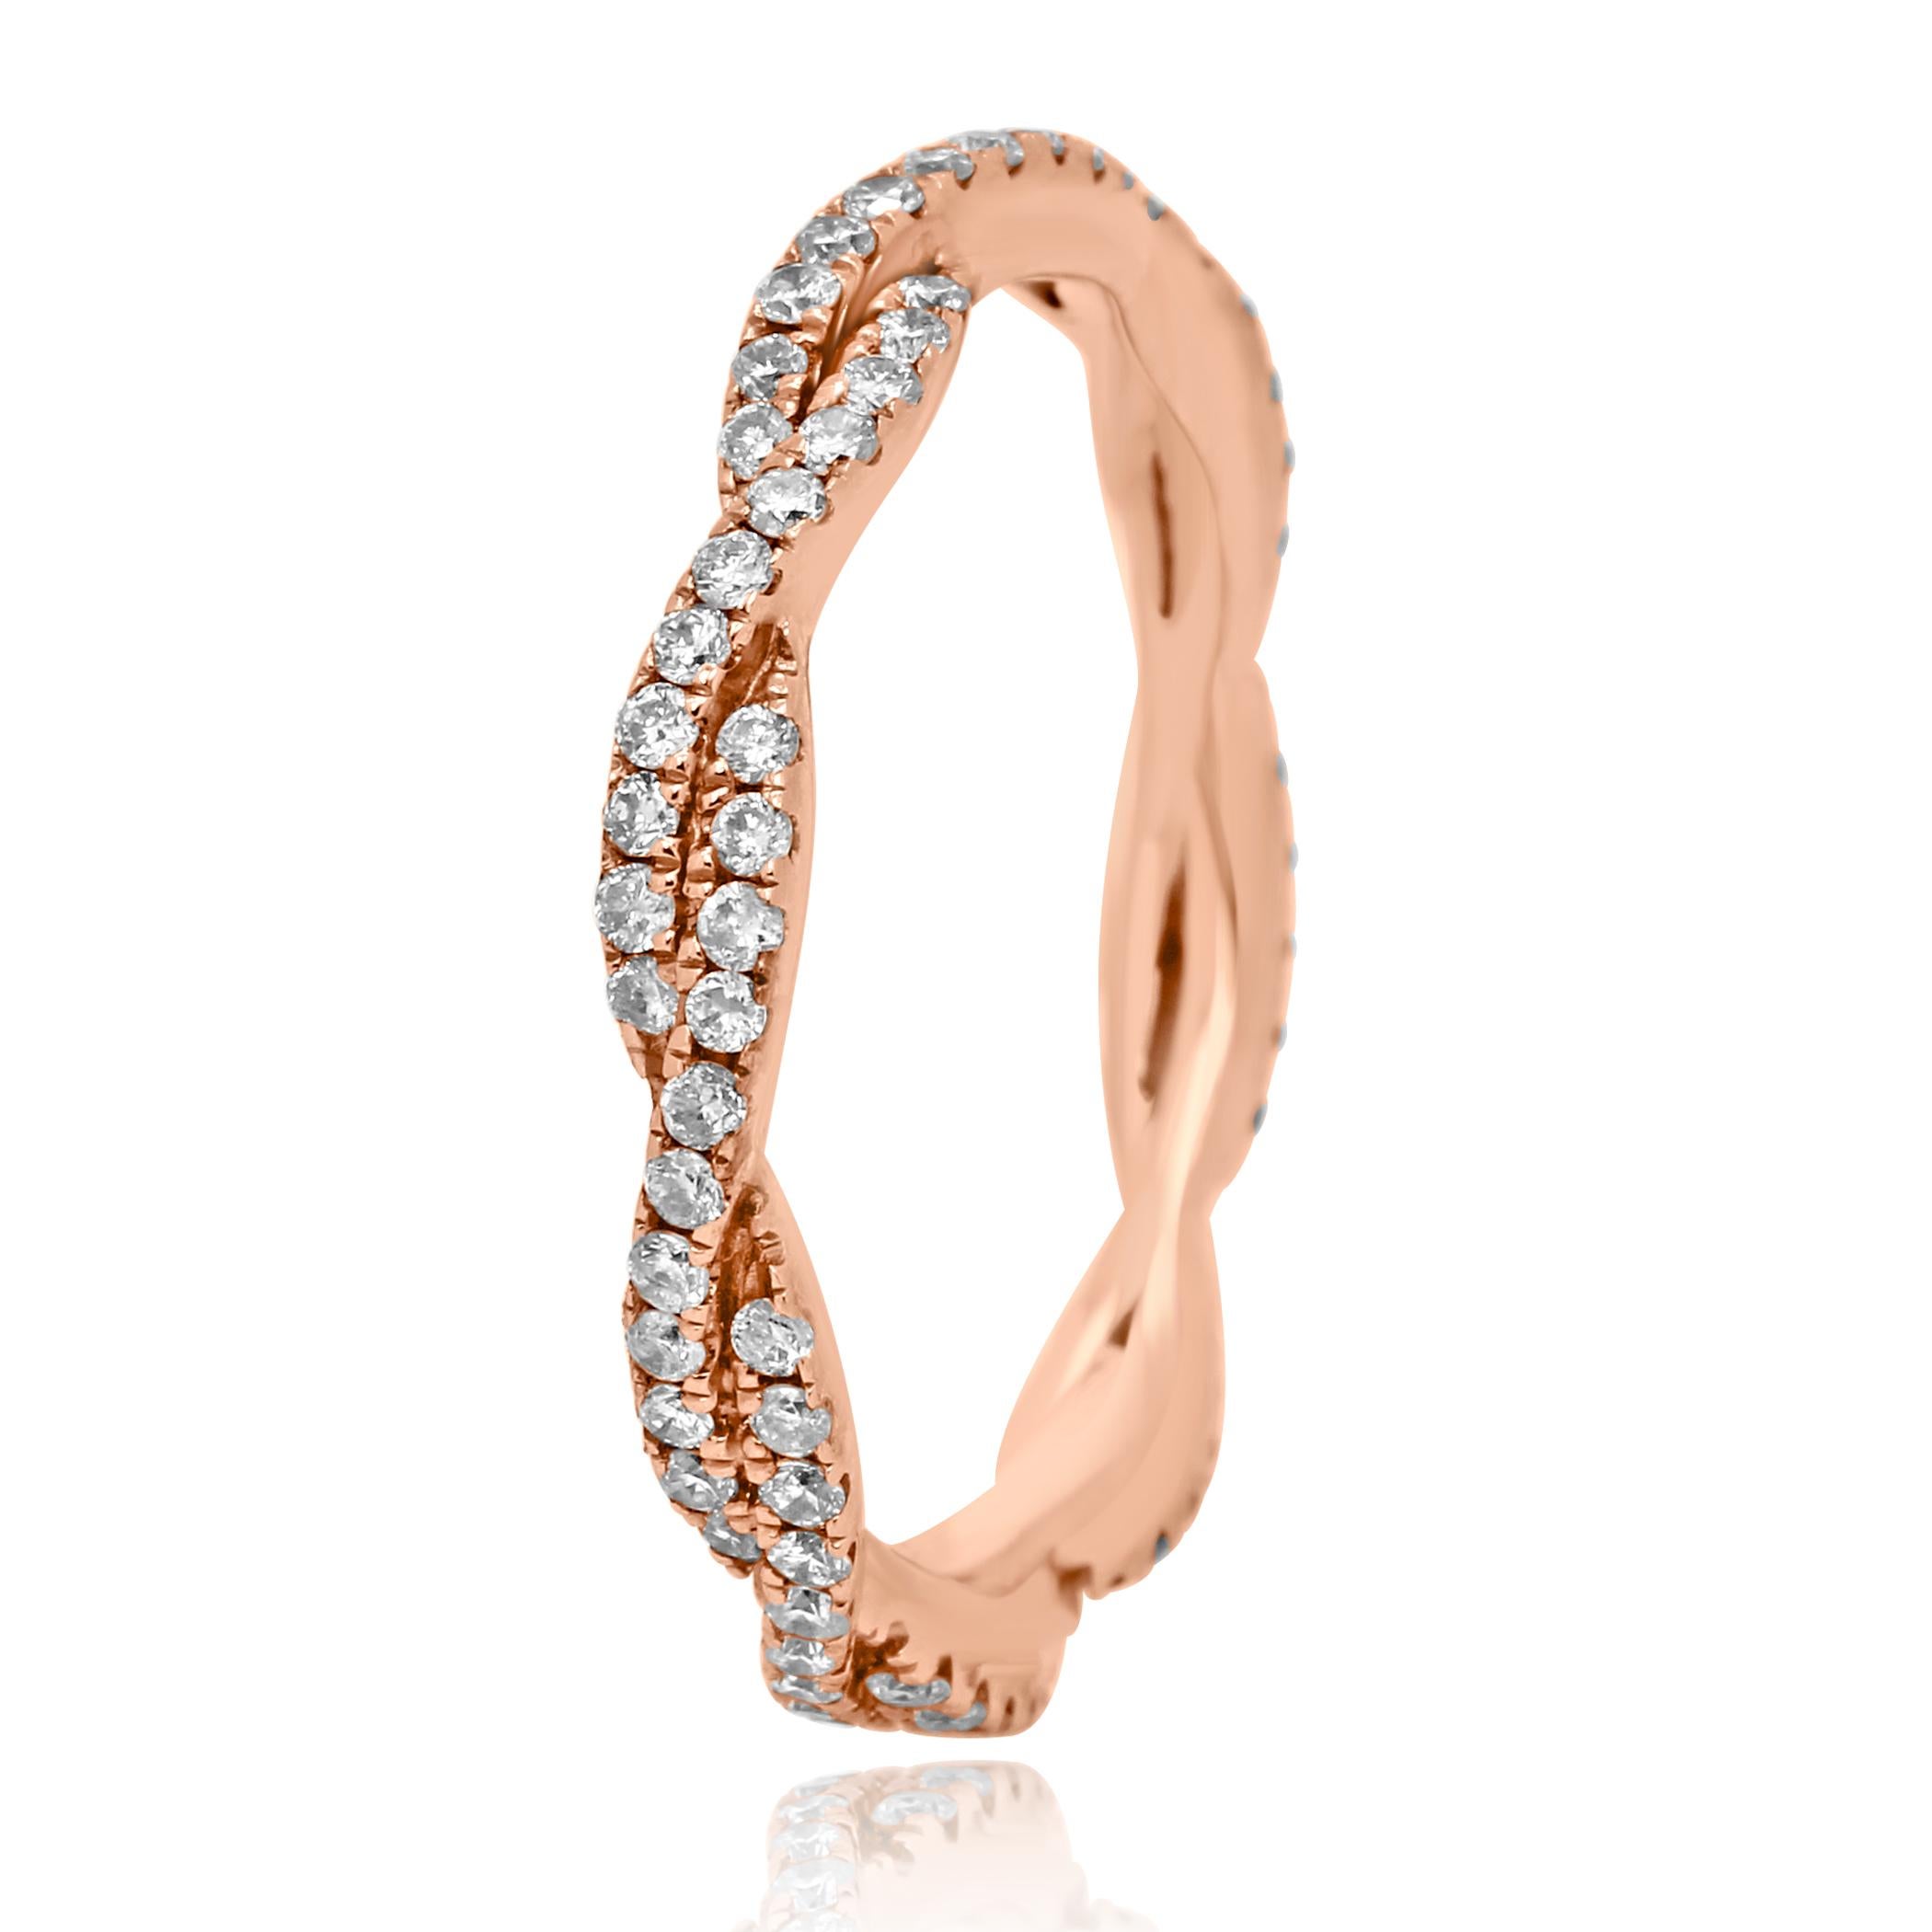 Natural Pink Diamond Round 0.70 Carat in Twisted Rope style Gorgeous 14K Band Ring.

Total Diamond Weight 0.70 Carat